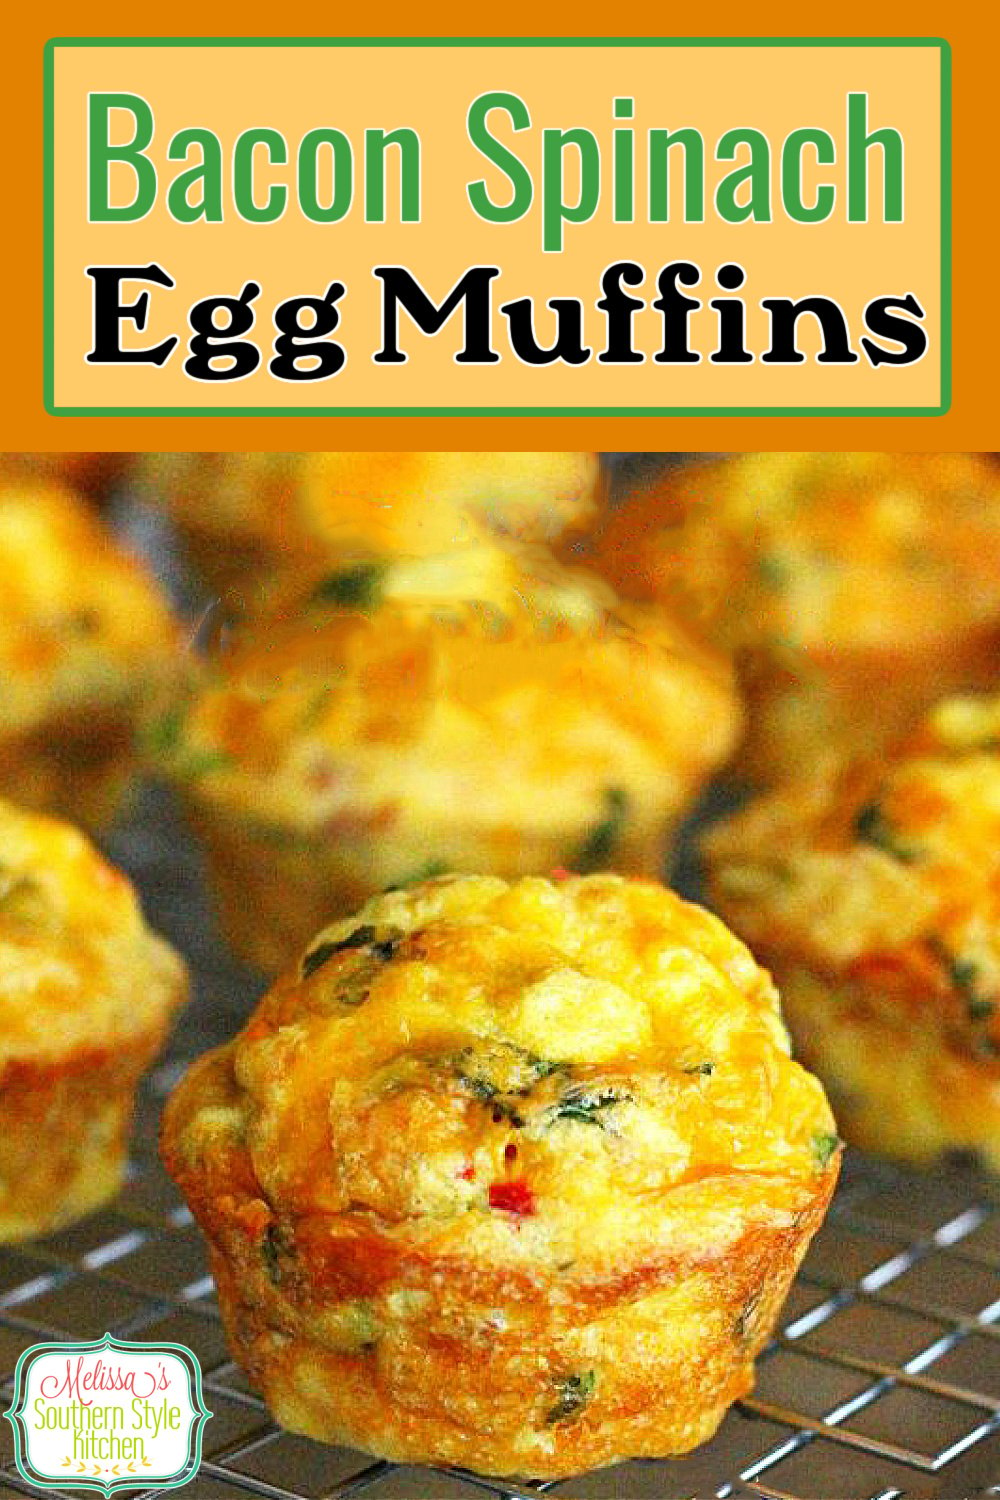 These single serving Bacon Spinach Egg Muffins are made in a muffin pan #eggmuffins #eggs #bakedeggs #muffinpaneggs #brunch #breakfast #eggrecipes #muffins #baconandeggs #baconspinacheggmuffins #spinachmuffins via @melissasssk